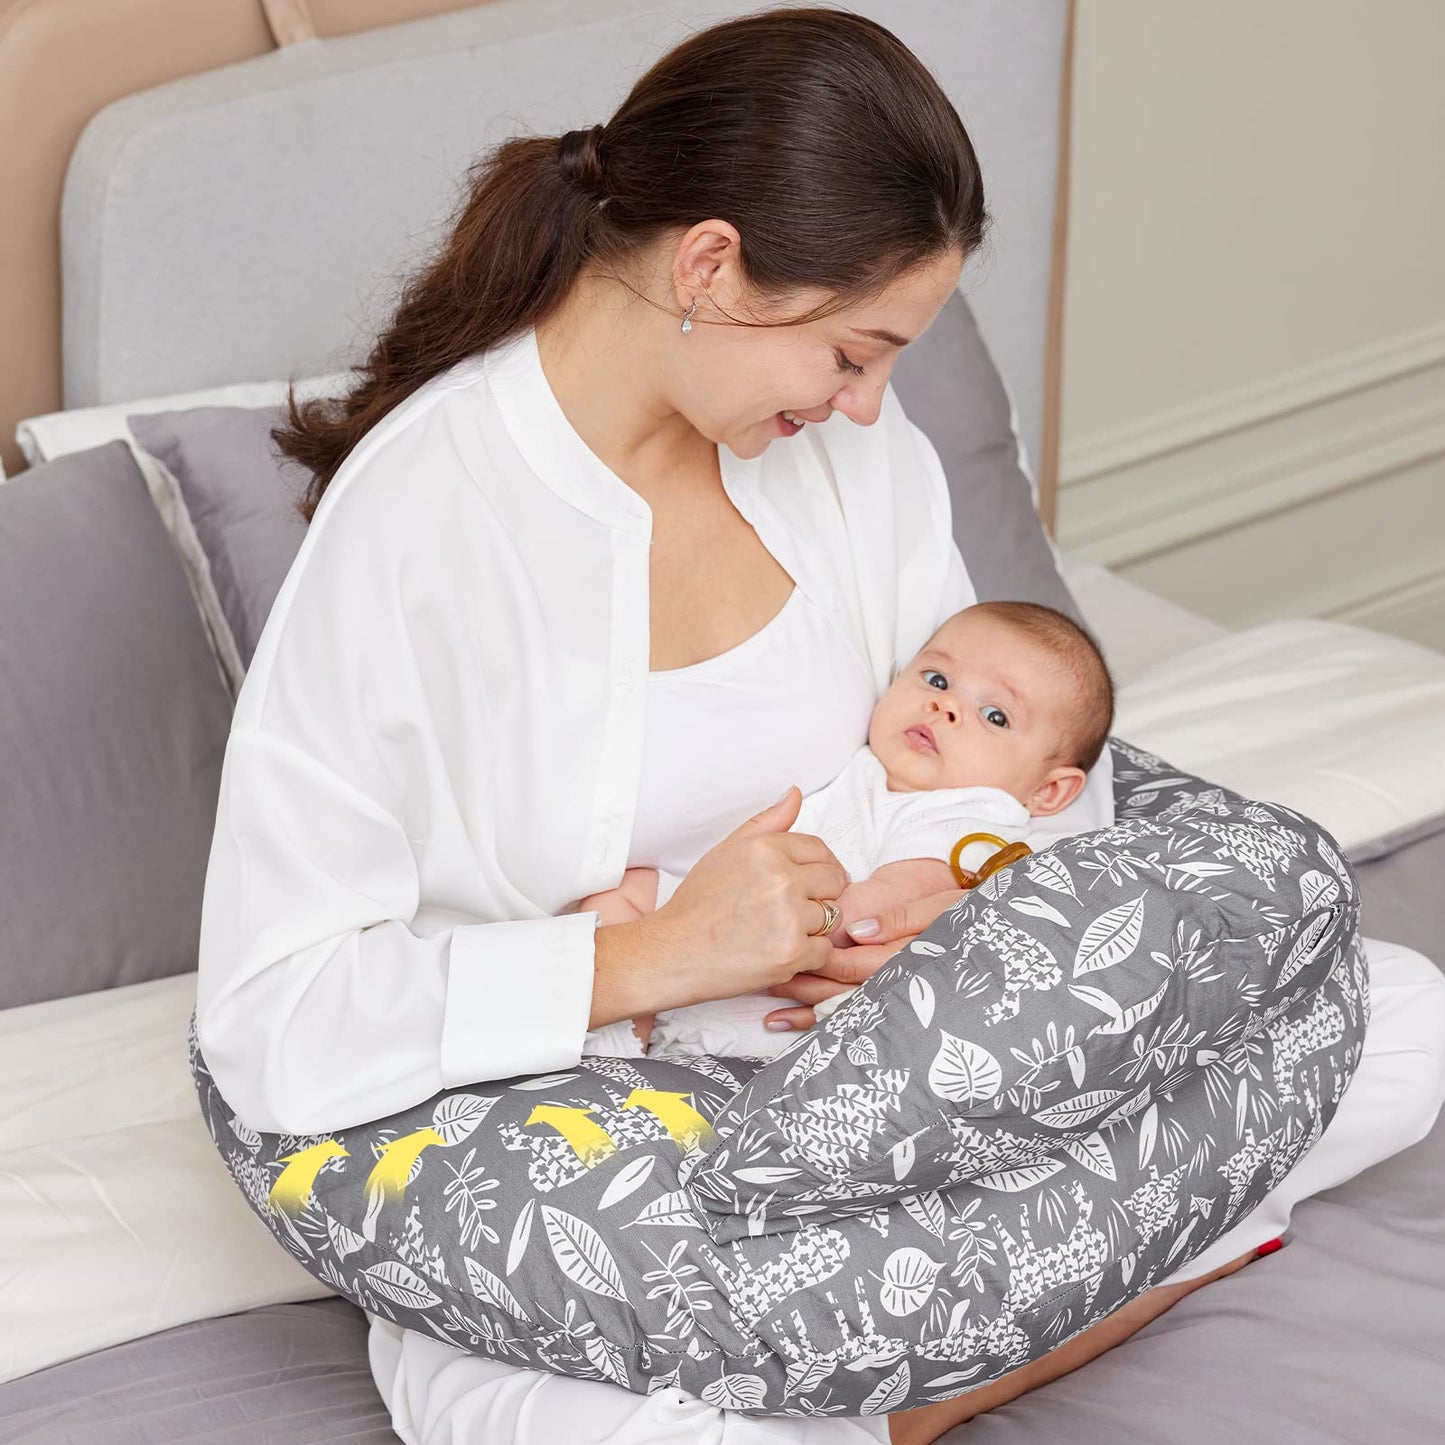 Momcozy Original Nursing Pillow, Ergonomic Breastfeeding Pillows with Security Fence for Baby, Adjustable Waist Strap and Removable Cotton Cover, Gazelle